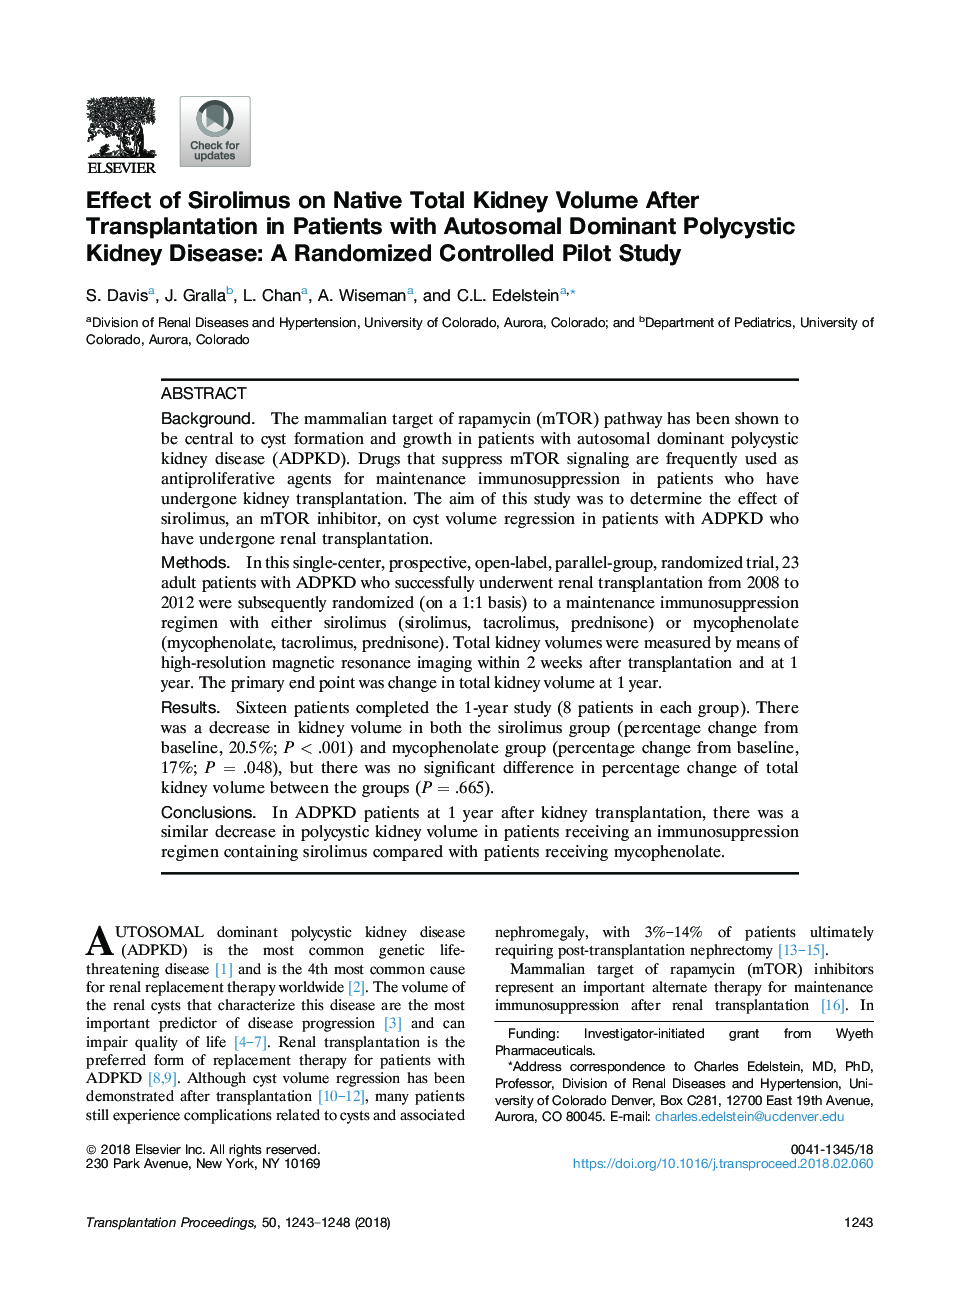 Effect of Sirolimus on Native Total Kidney Volume After Transplantation in Patients with Autosomal Dominant Polycystic Kidney Disease: A Randomized Controlled Pilot Study